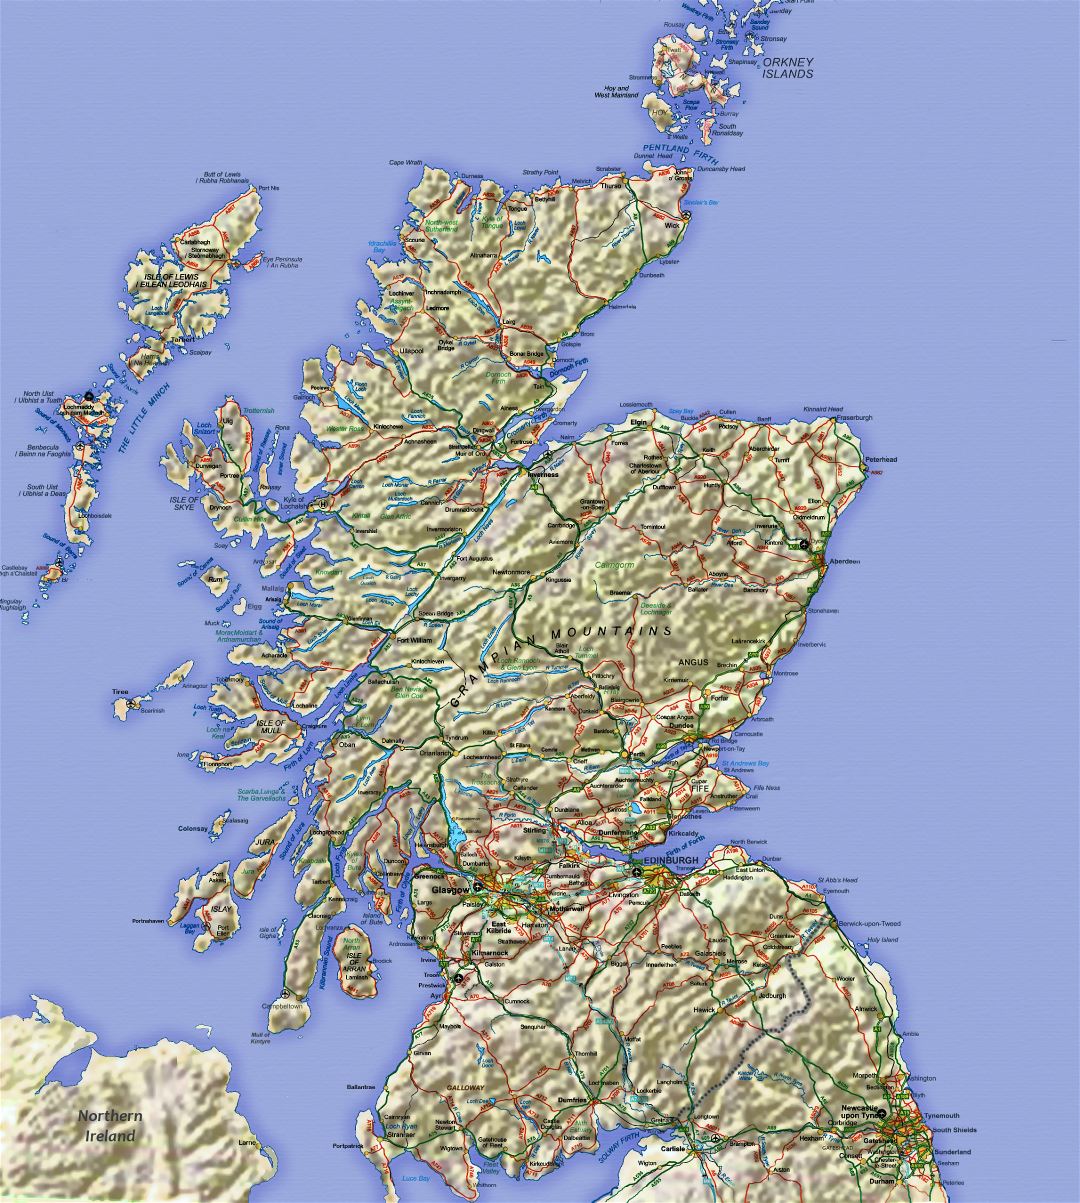 Large map of Scotland with relief, roads, major cities and airports